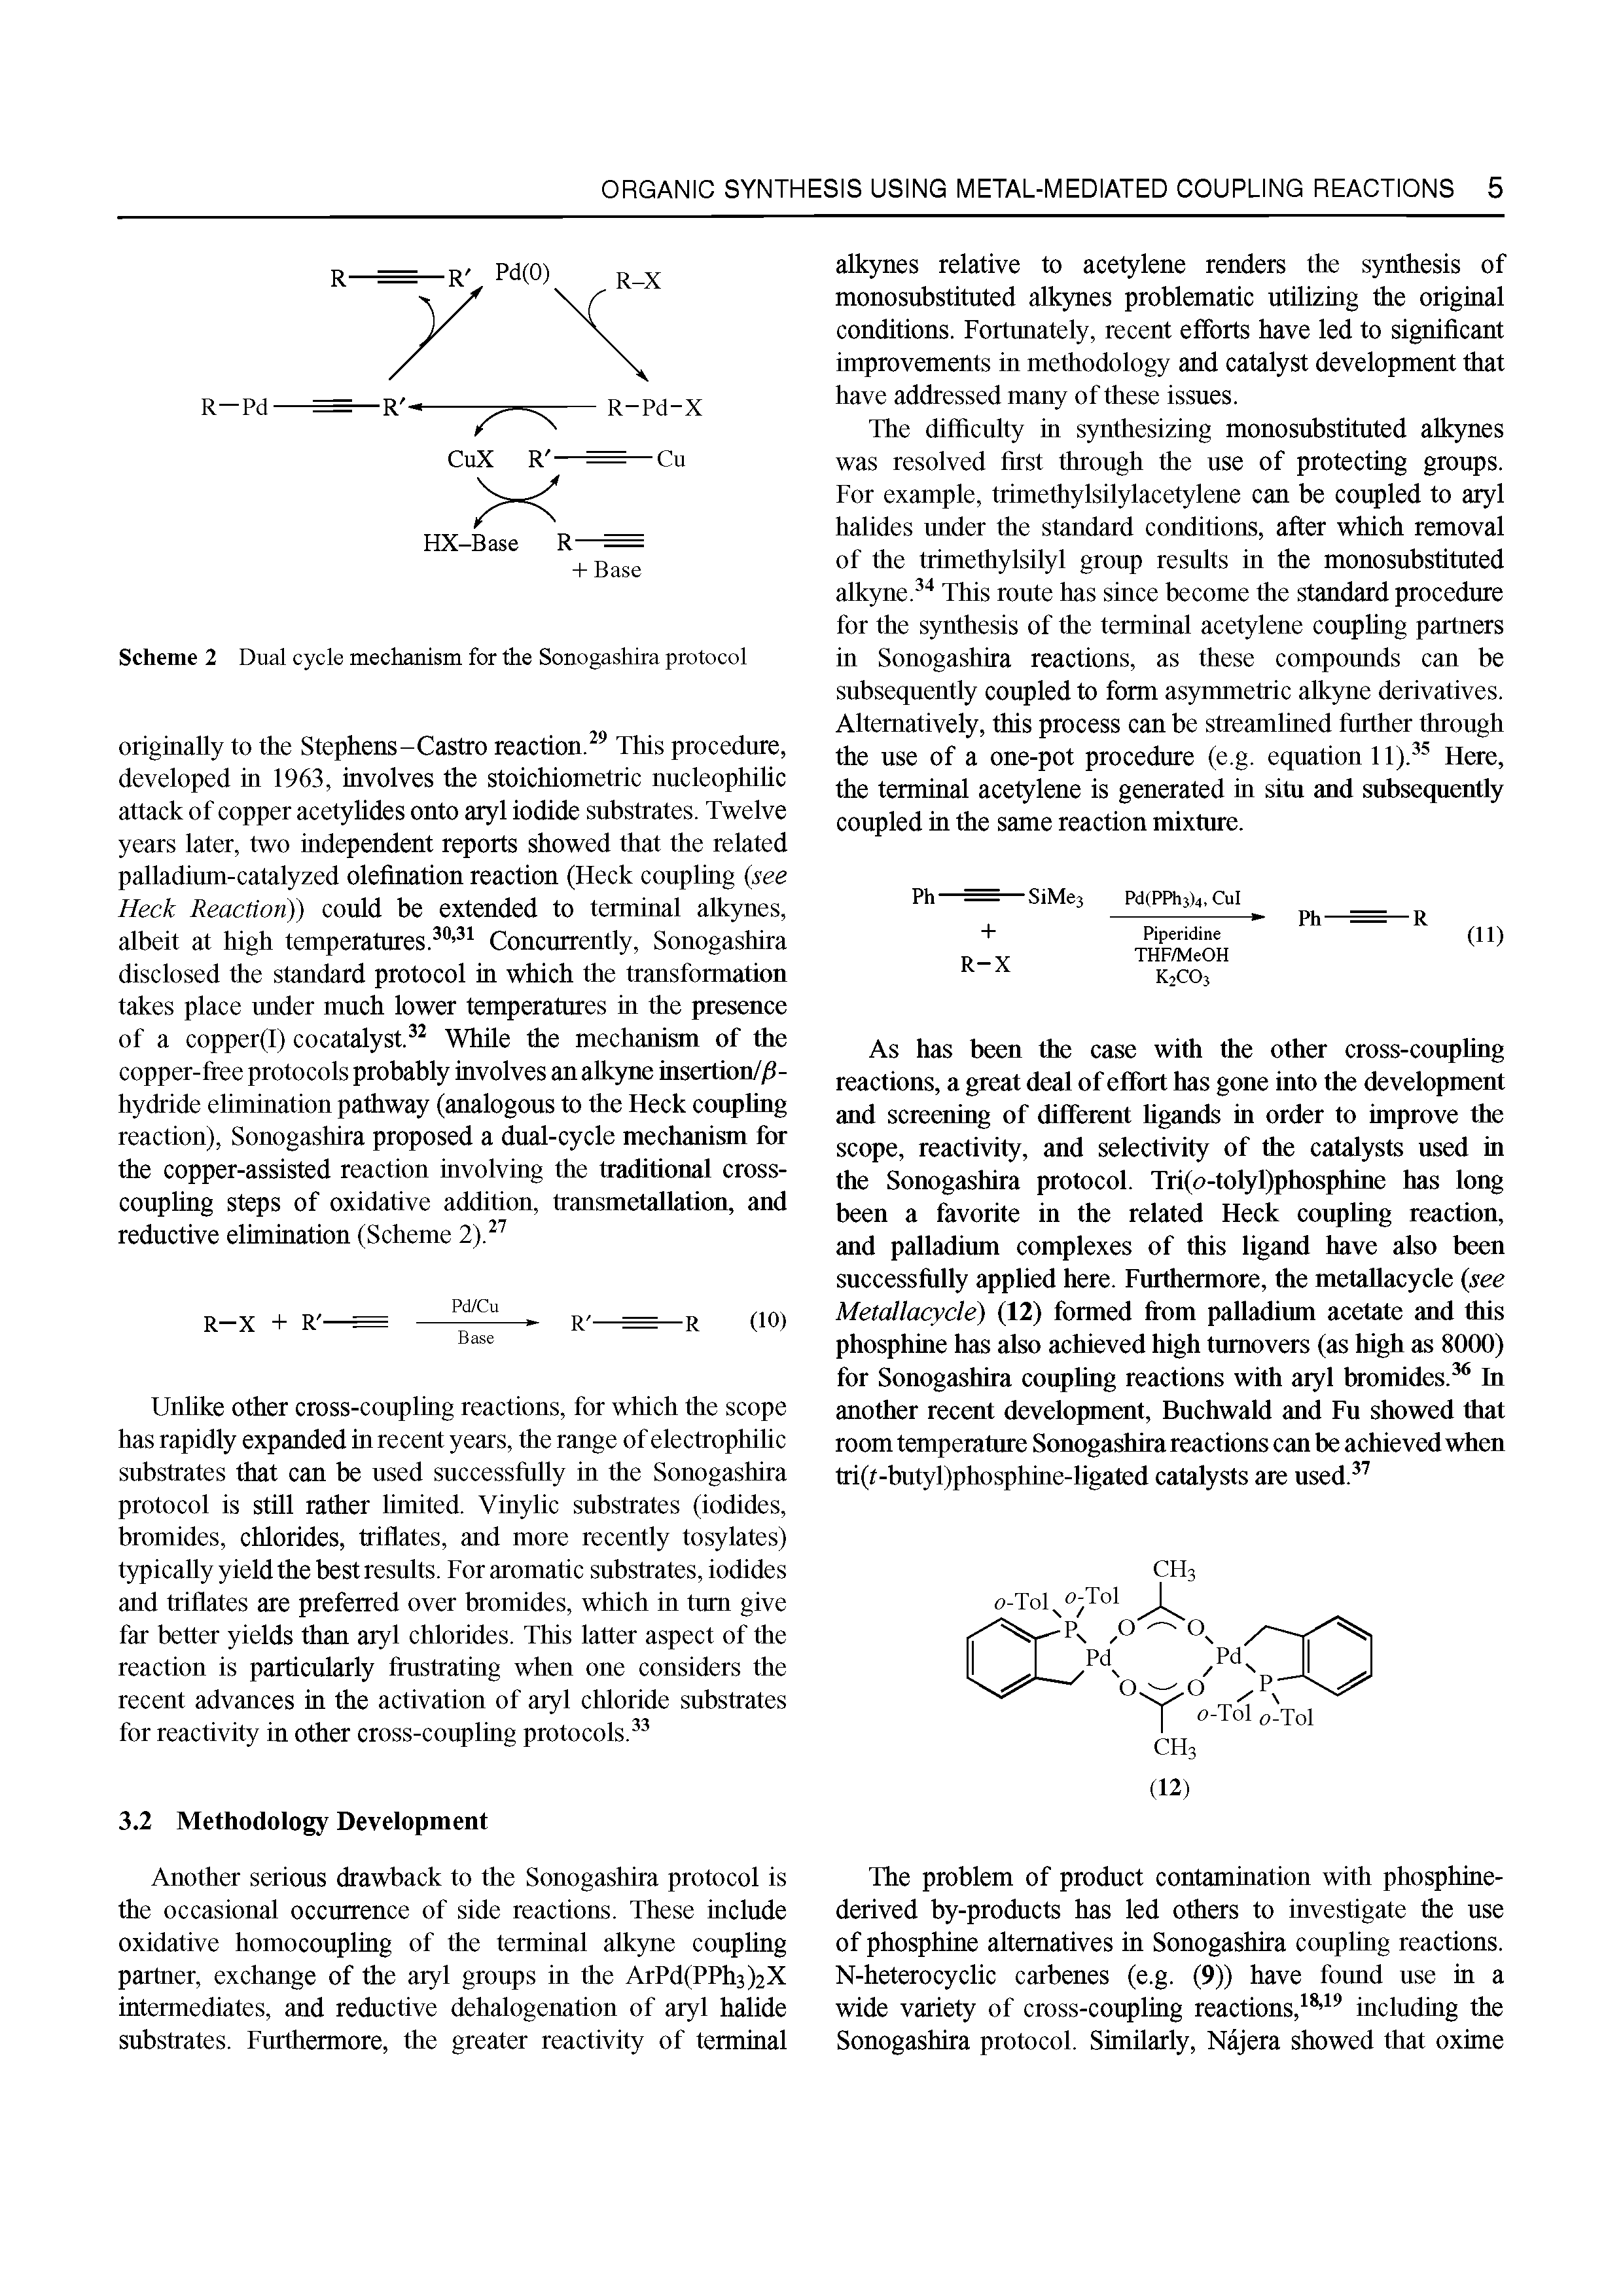 Scheme 2 Dual cycle mechanism for the Sonogashira protocol...